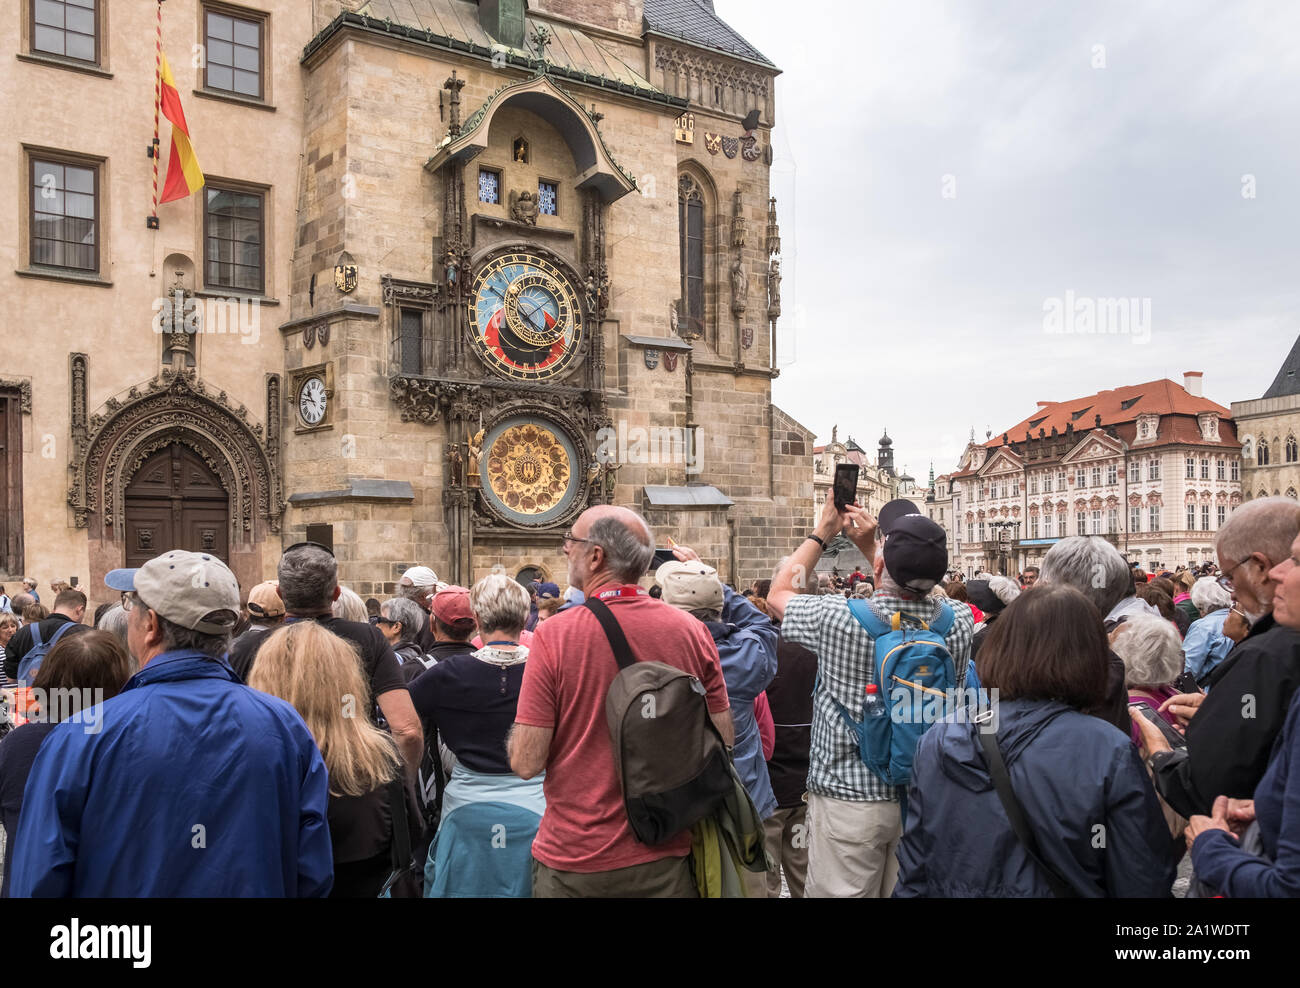 Tourists crowd gather at the medieval Astronomical Clock, a popular tourist attraction in Old Town Square, Prague, Czech Republic. Stock Photo